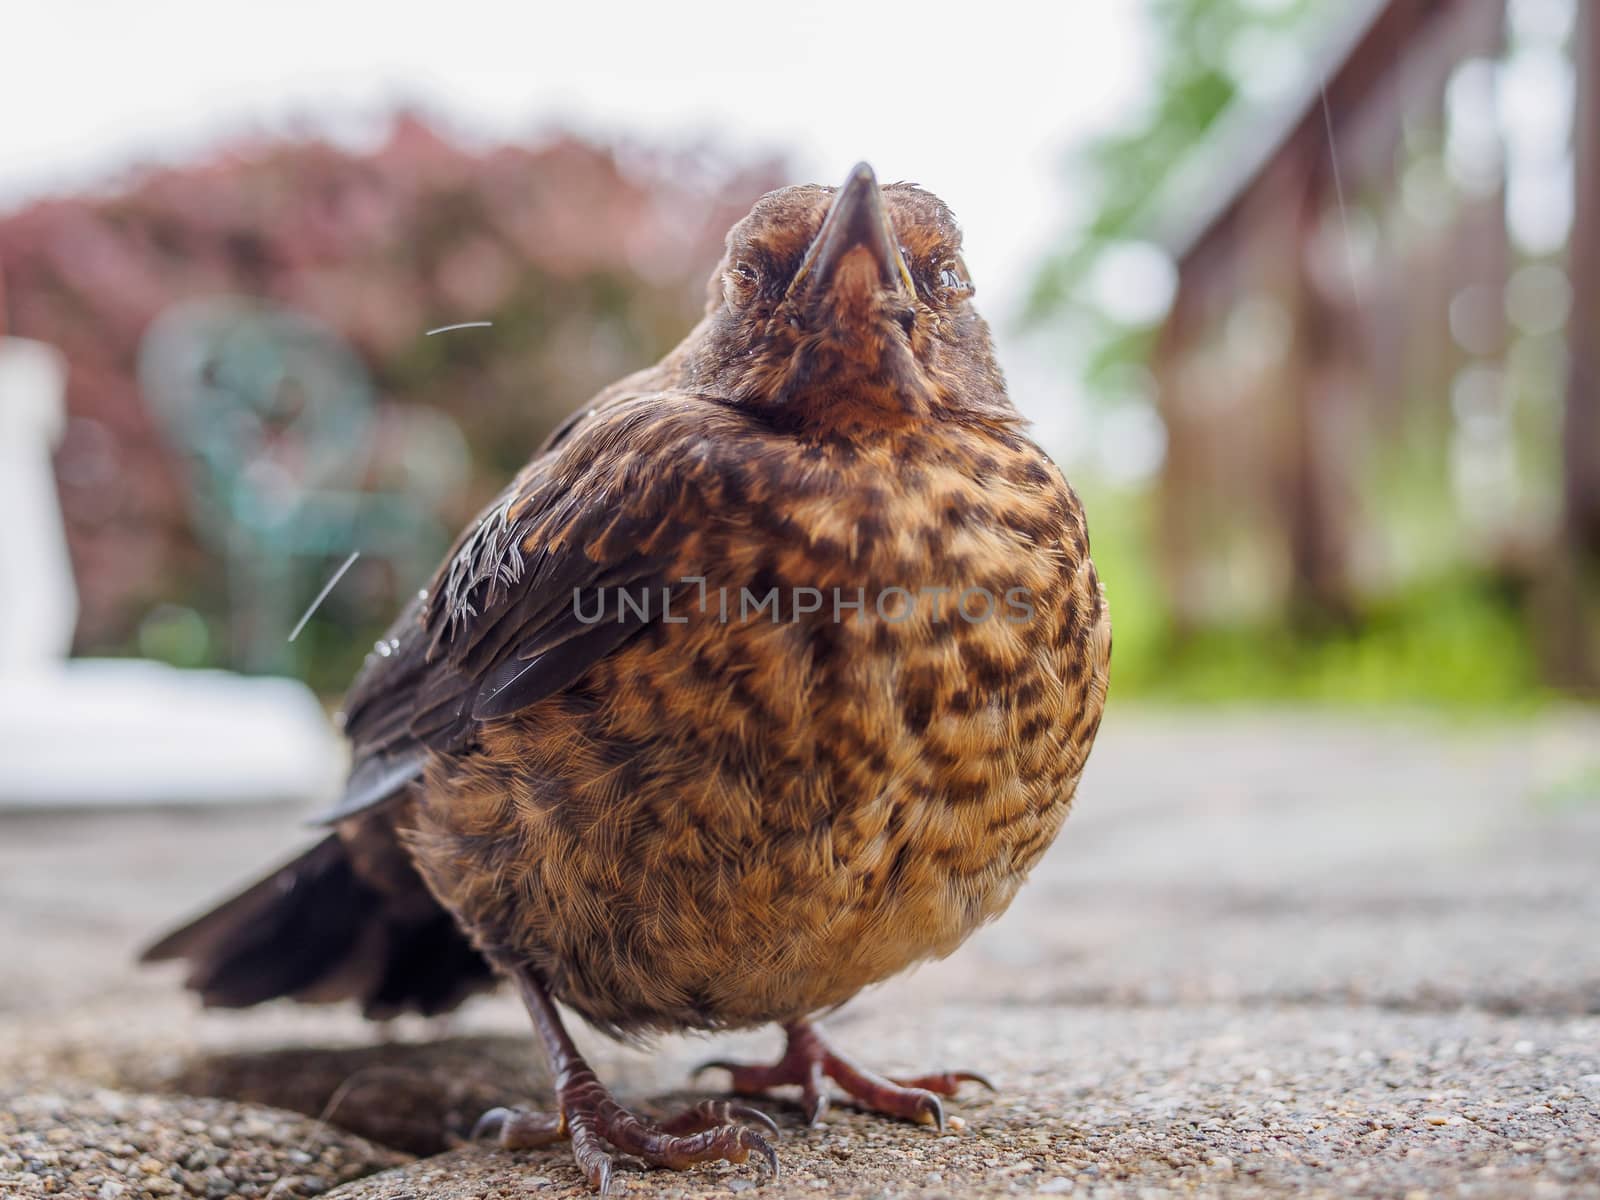 Extremely close view of a brown song thrush